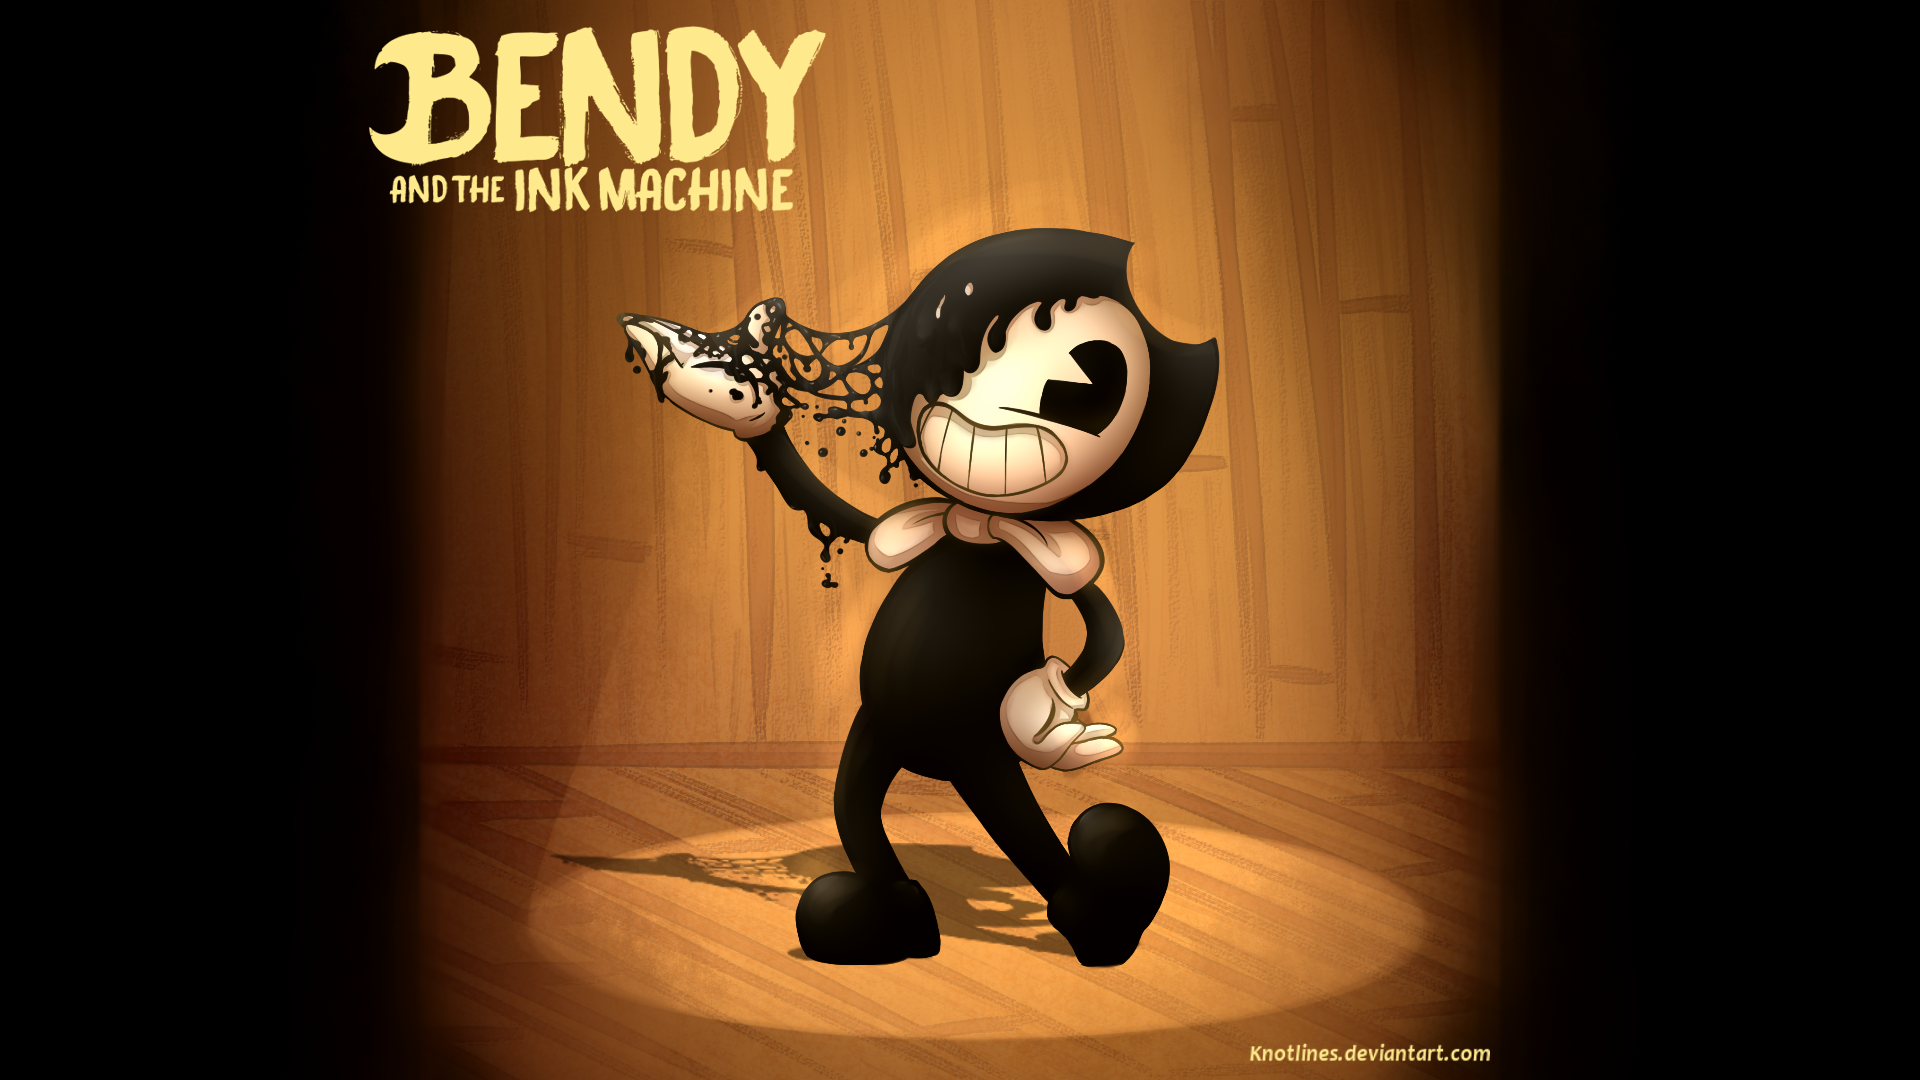 bendy-and-the-ink-machine-by-knotlines-on-deviantart